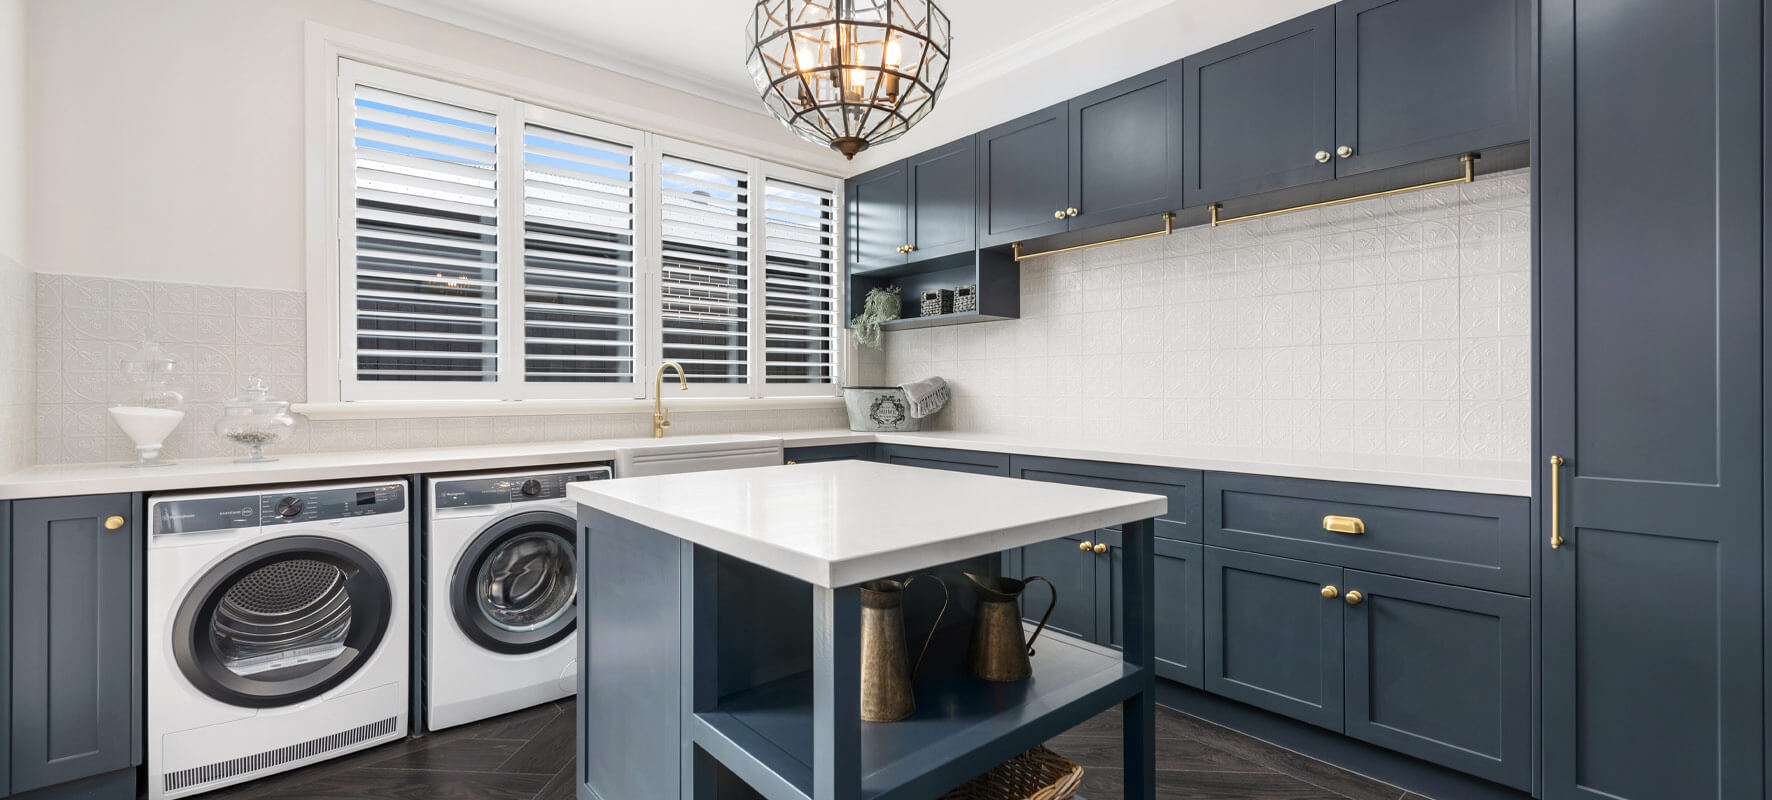 Photo of large laundry in Ranch style home showing navy blue cabinets, centre island cabinets with white stone benchtops.